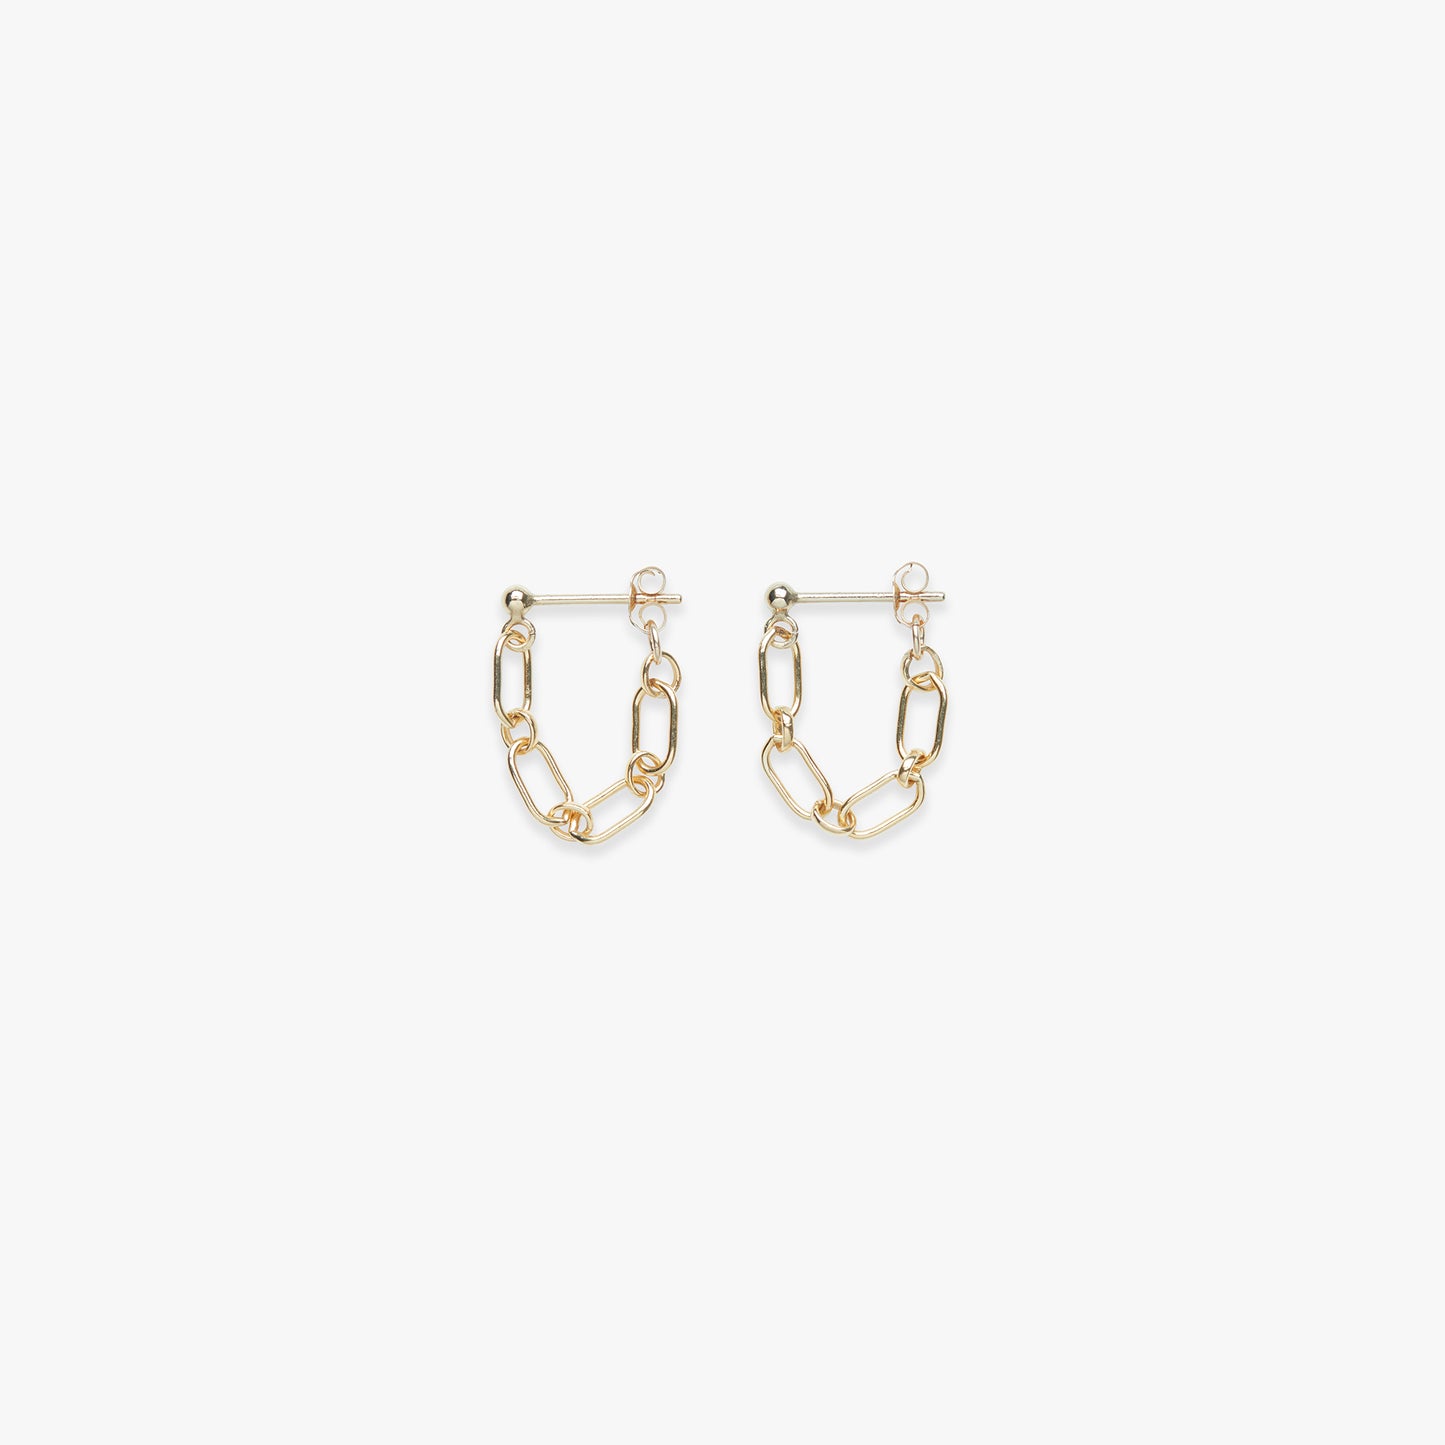 Chain stud earring gold filled